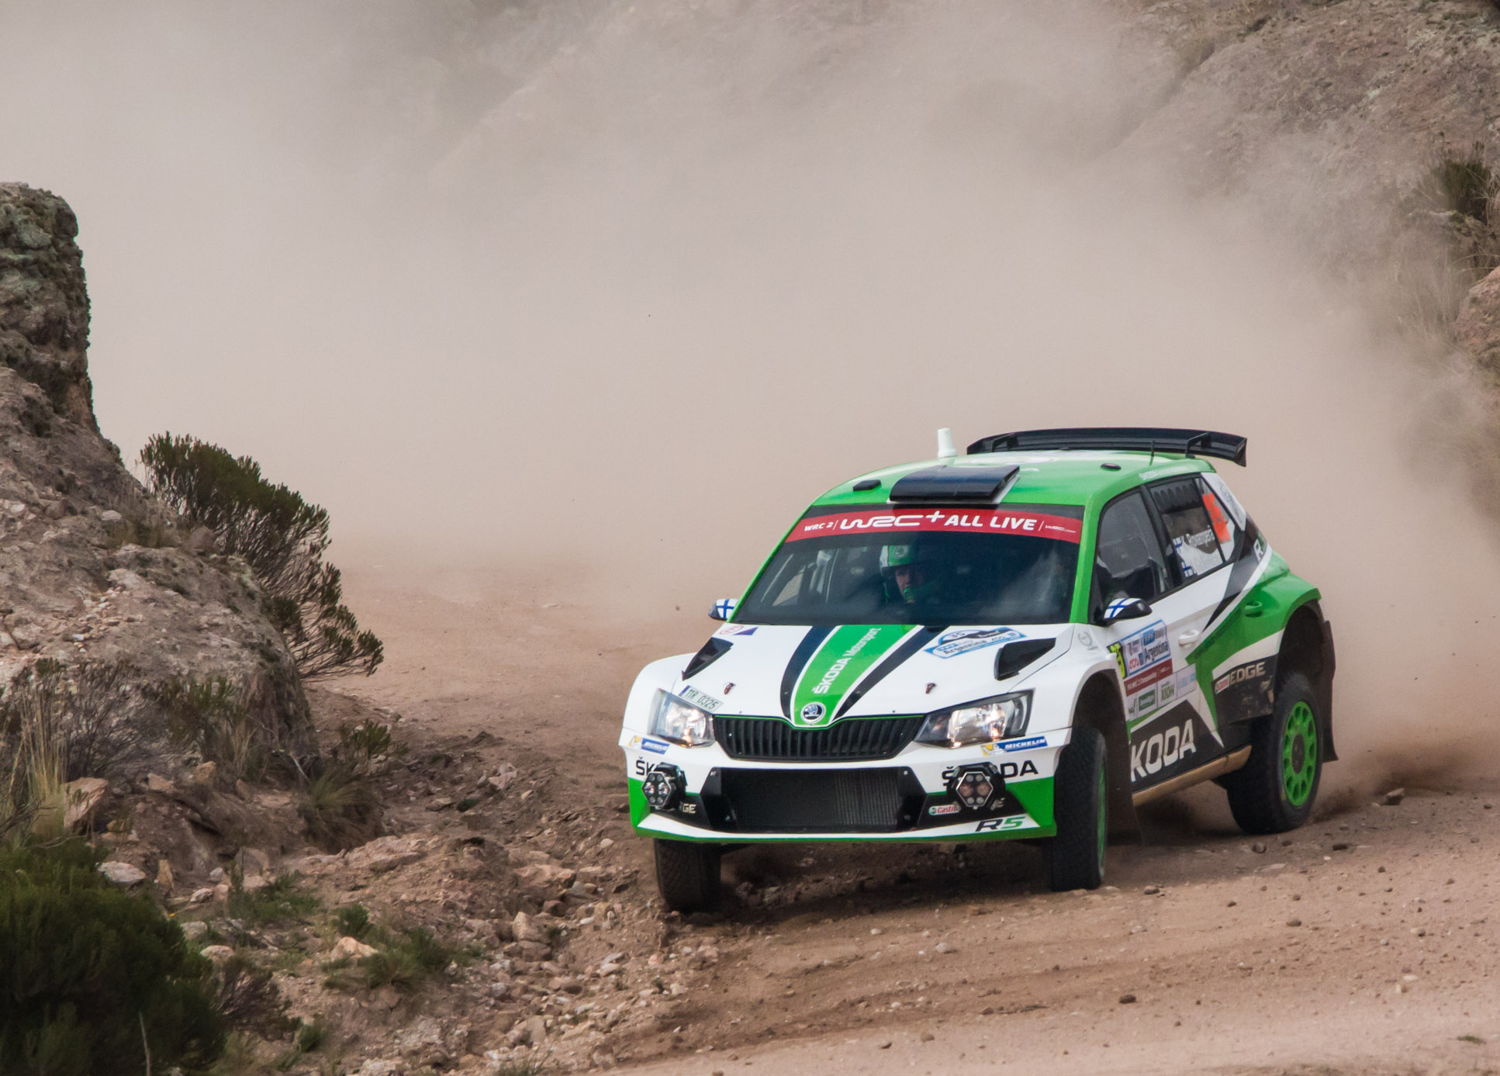 Finnish ŠKODA juniors Kalle Rovanperä and Jonne Halttunen retired with an accident while they were leading the WRC 2 category at Rally Argentina